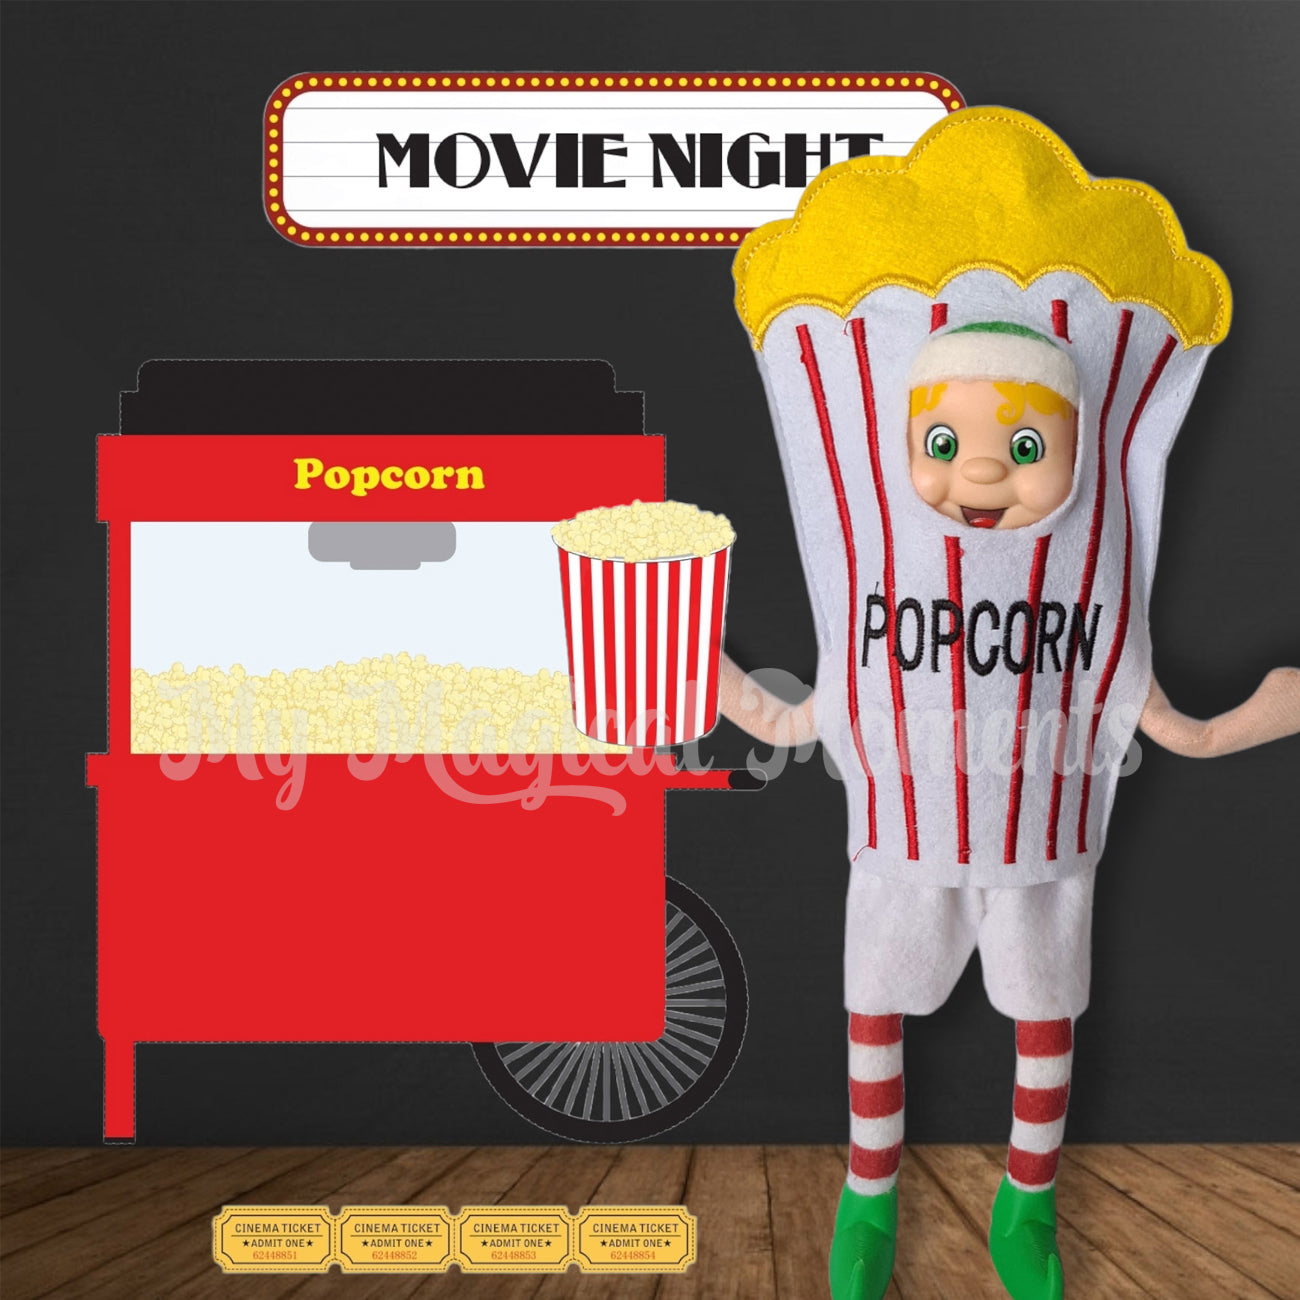 Elf wearing a popcorn costume with a movie night